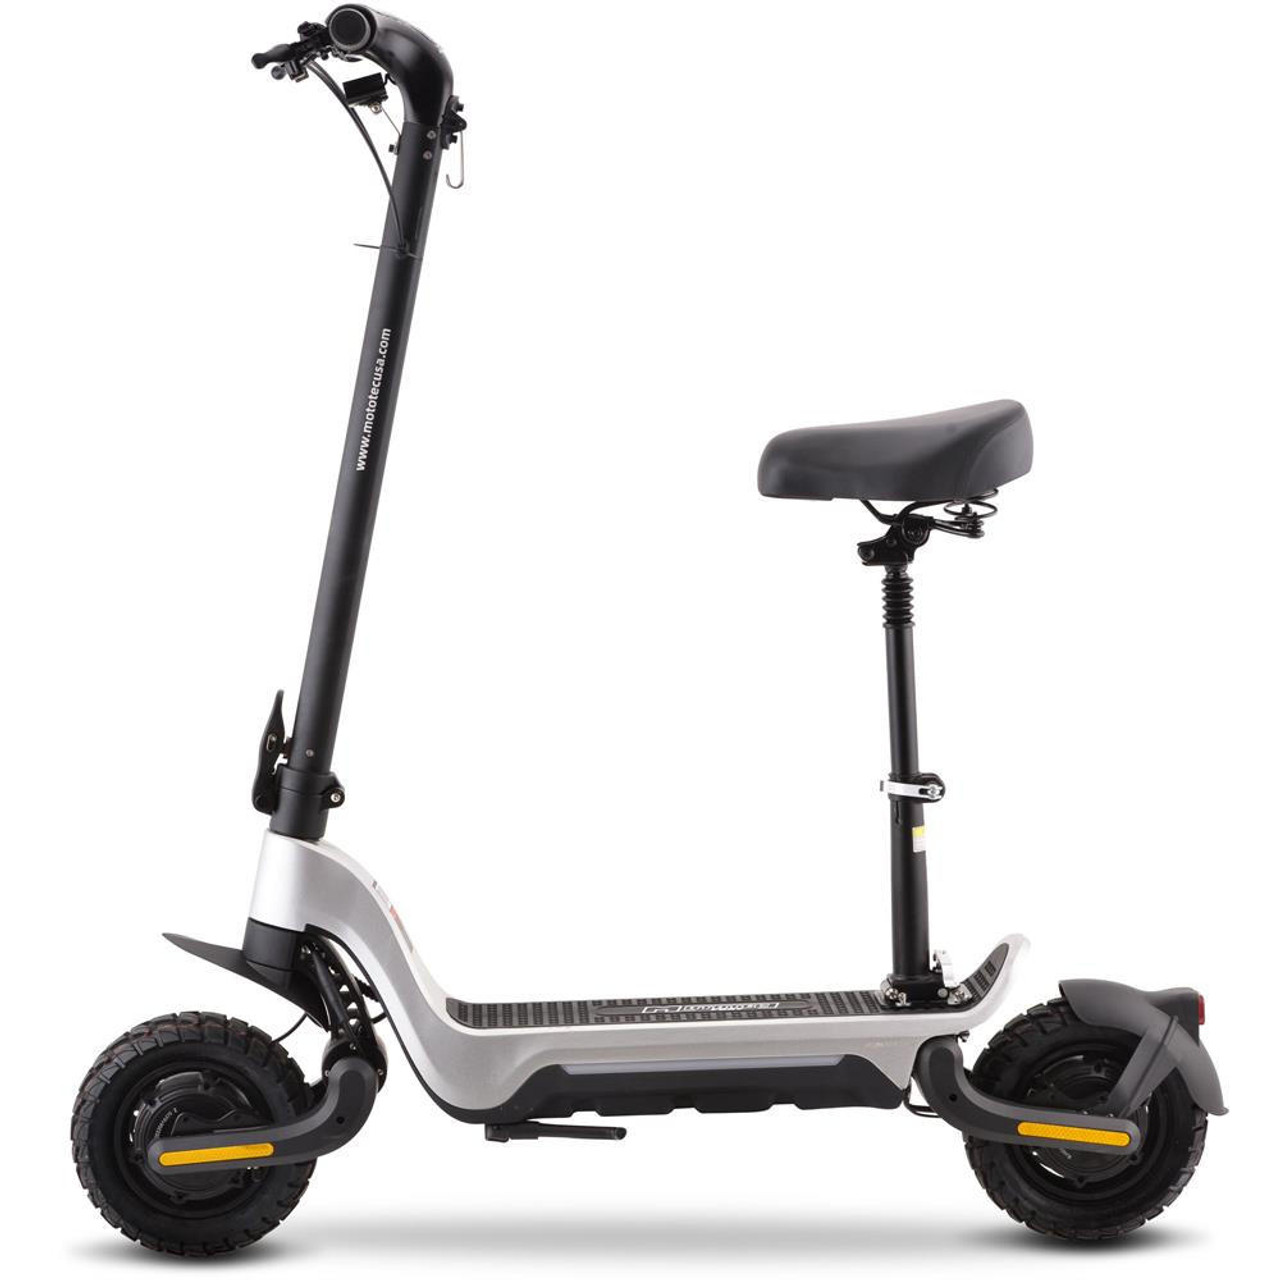  Mototec Fury 48v 1000w Lithium Electric Scooter 